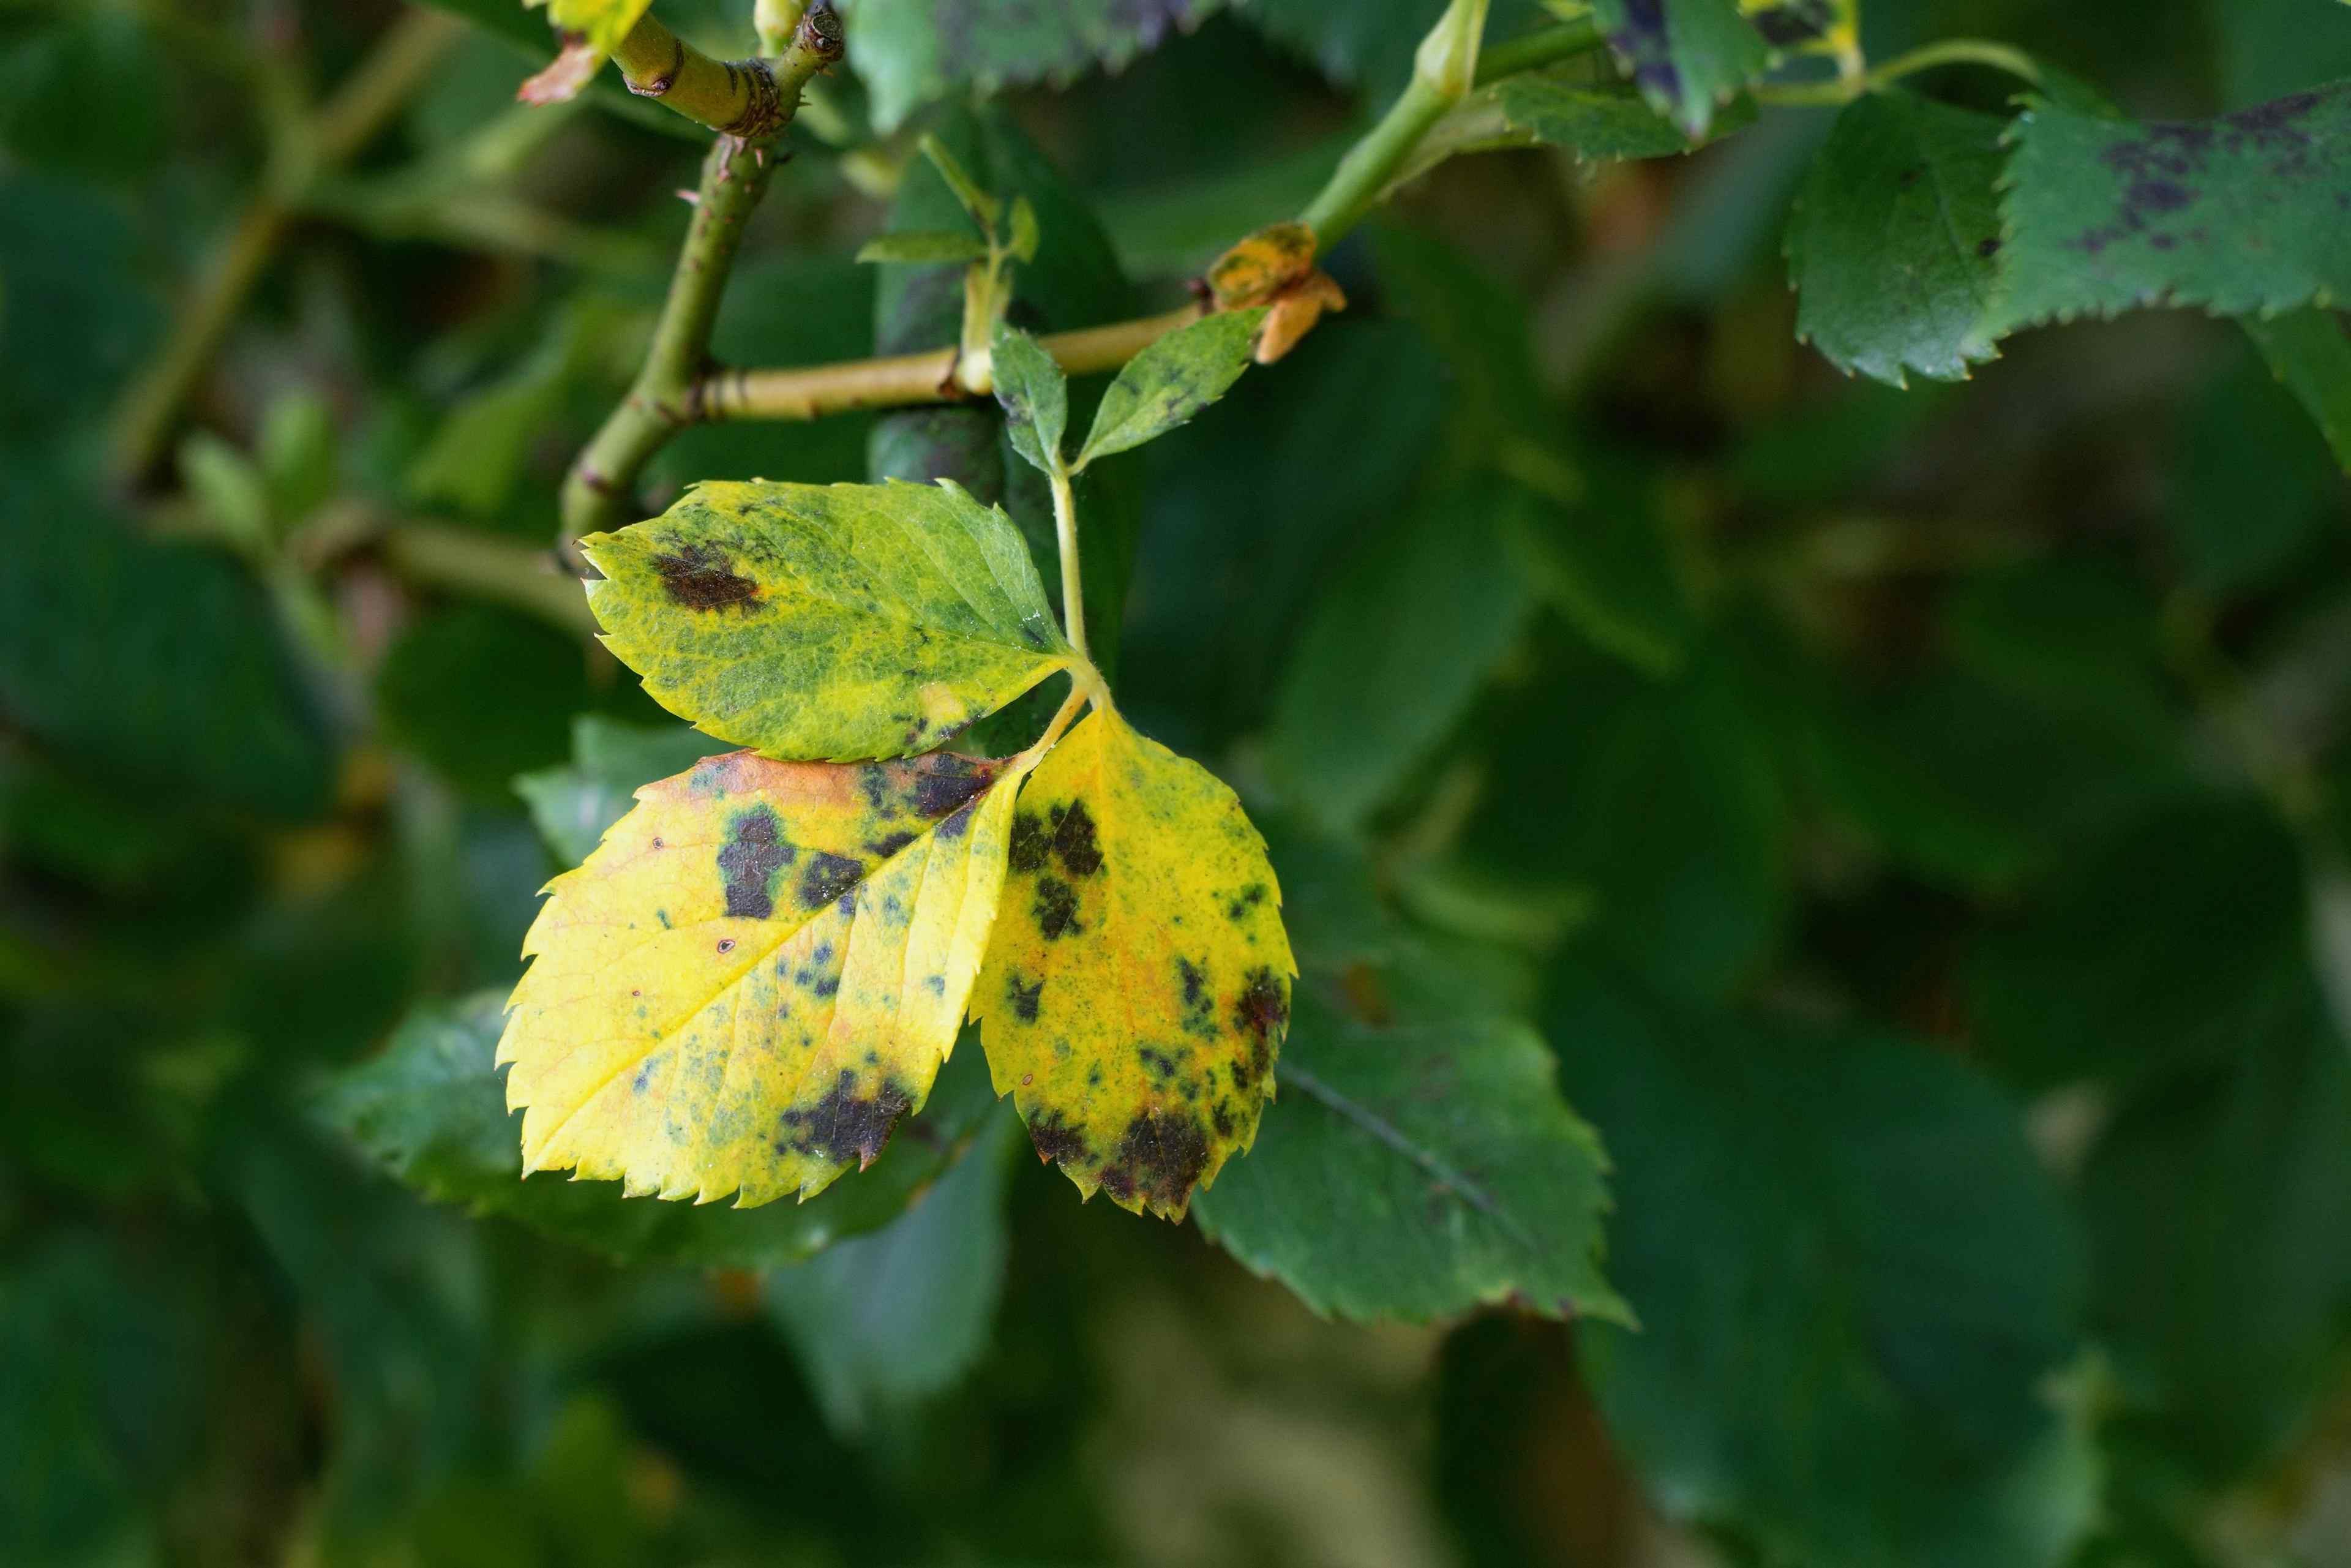 Close up of diseased spotted leaves.